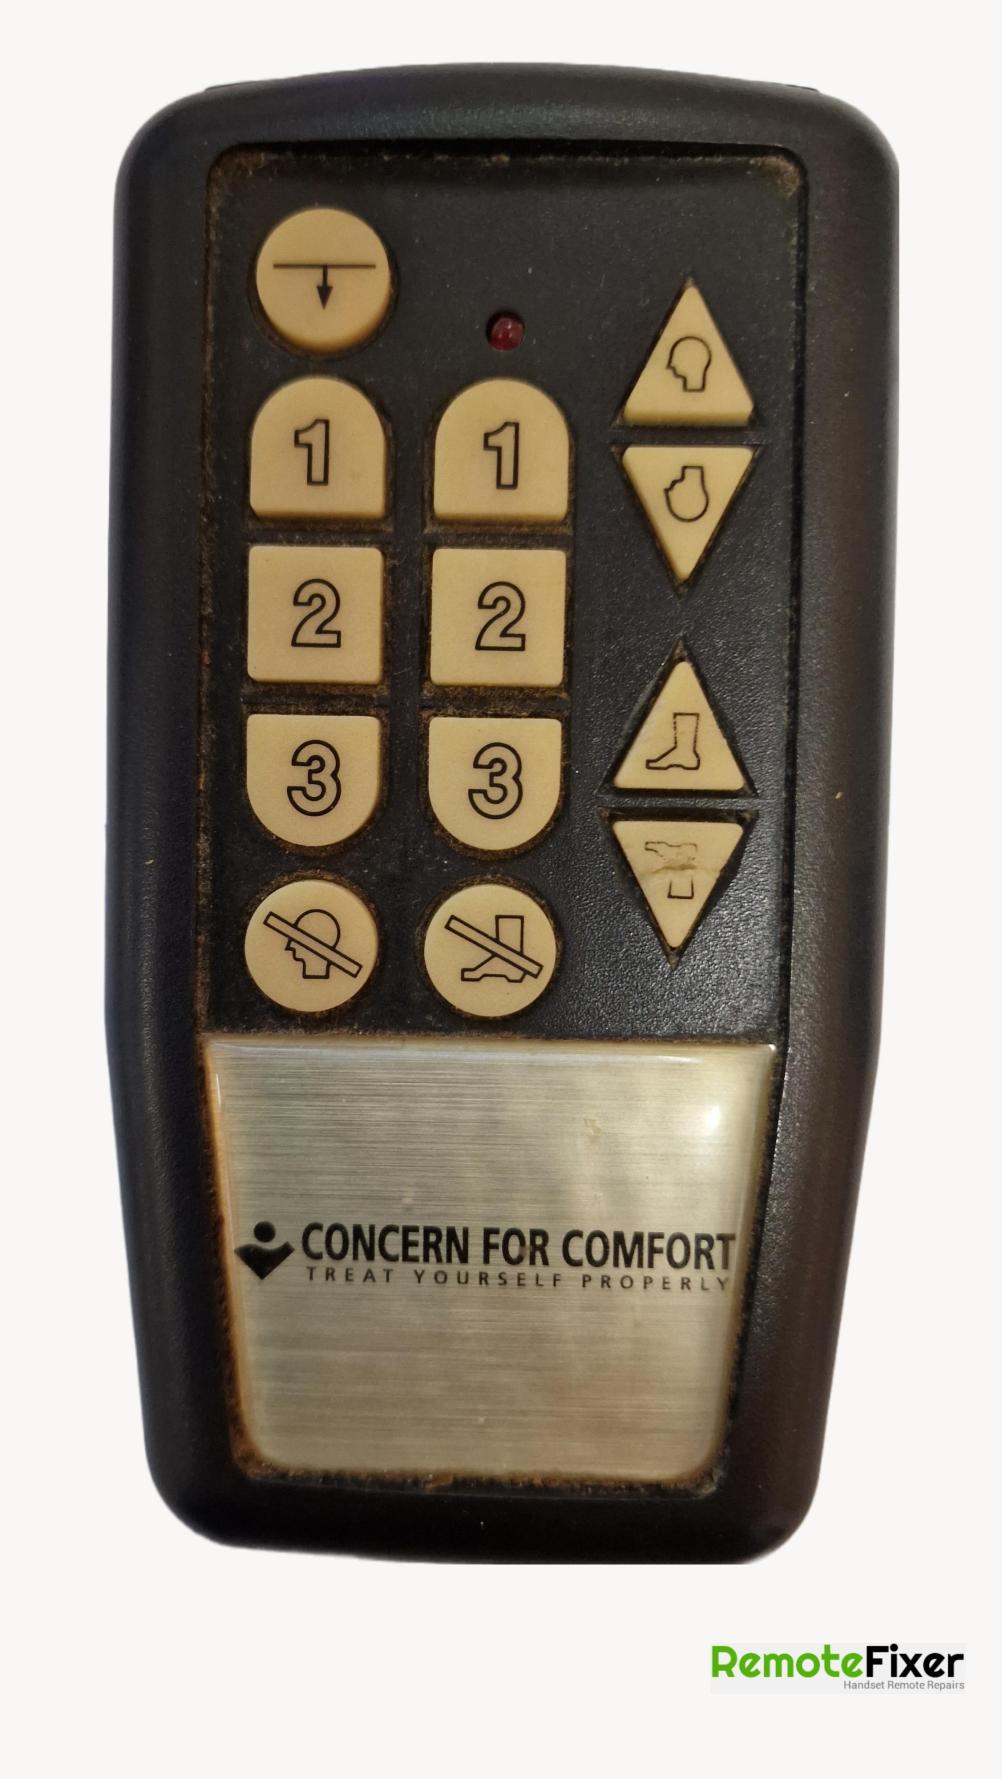 Concern for comfort XL0394 - 260616 Remote Control - Front Image